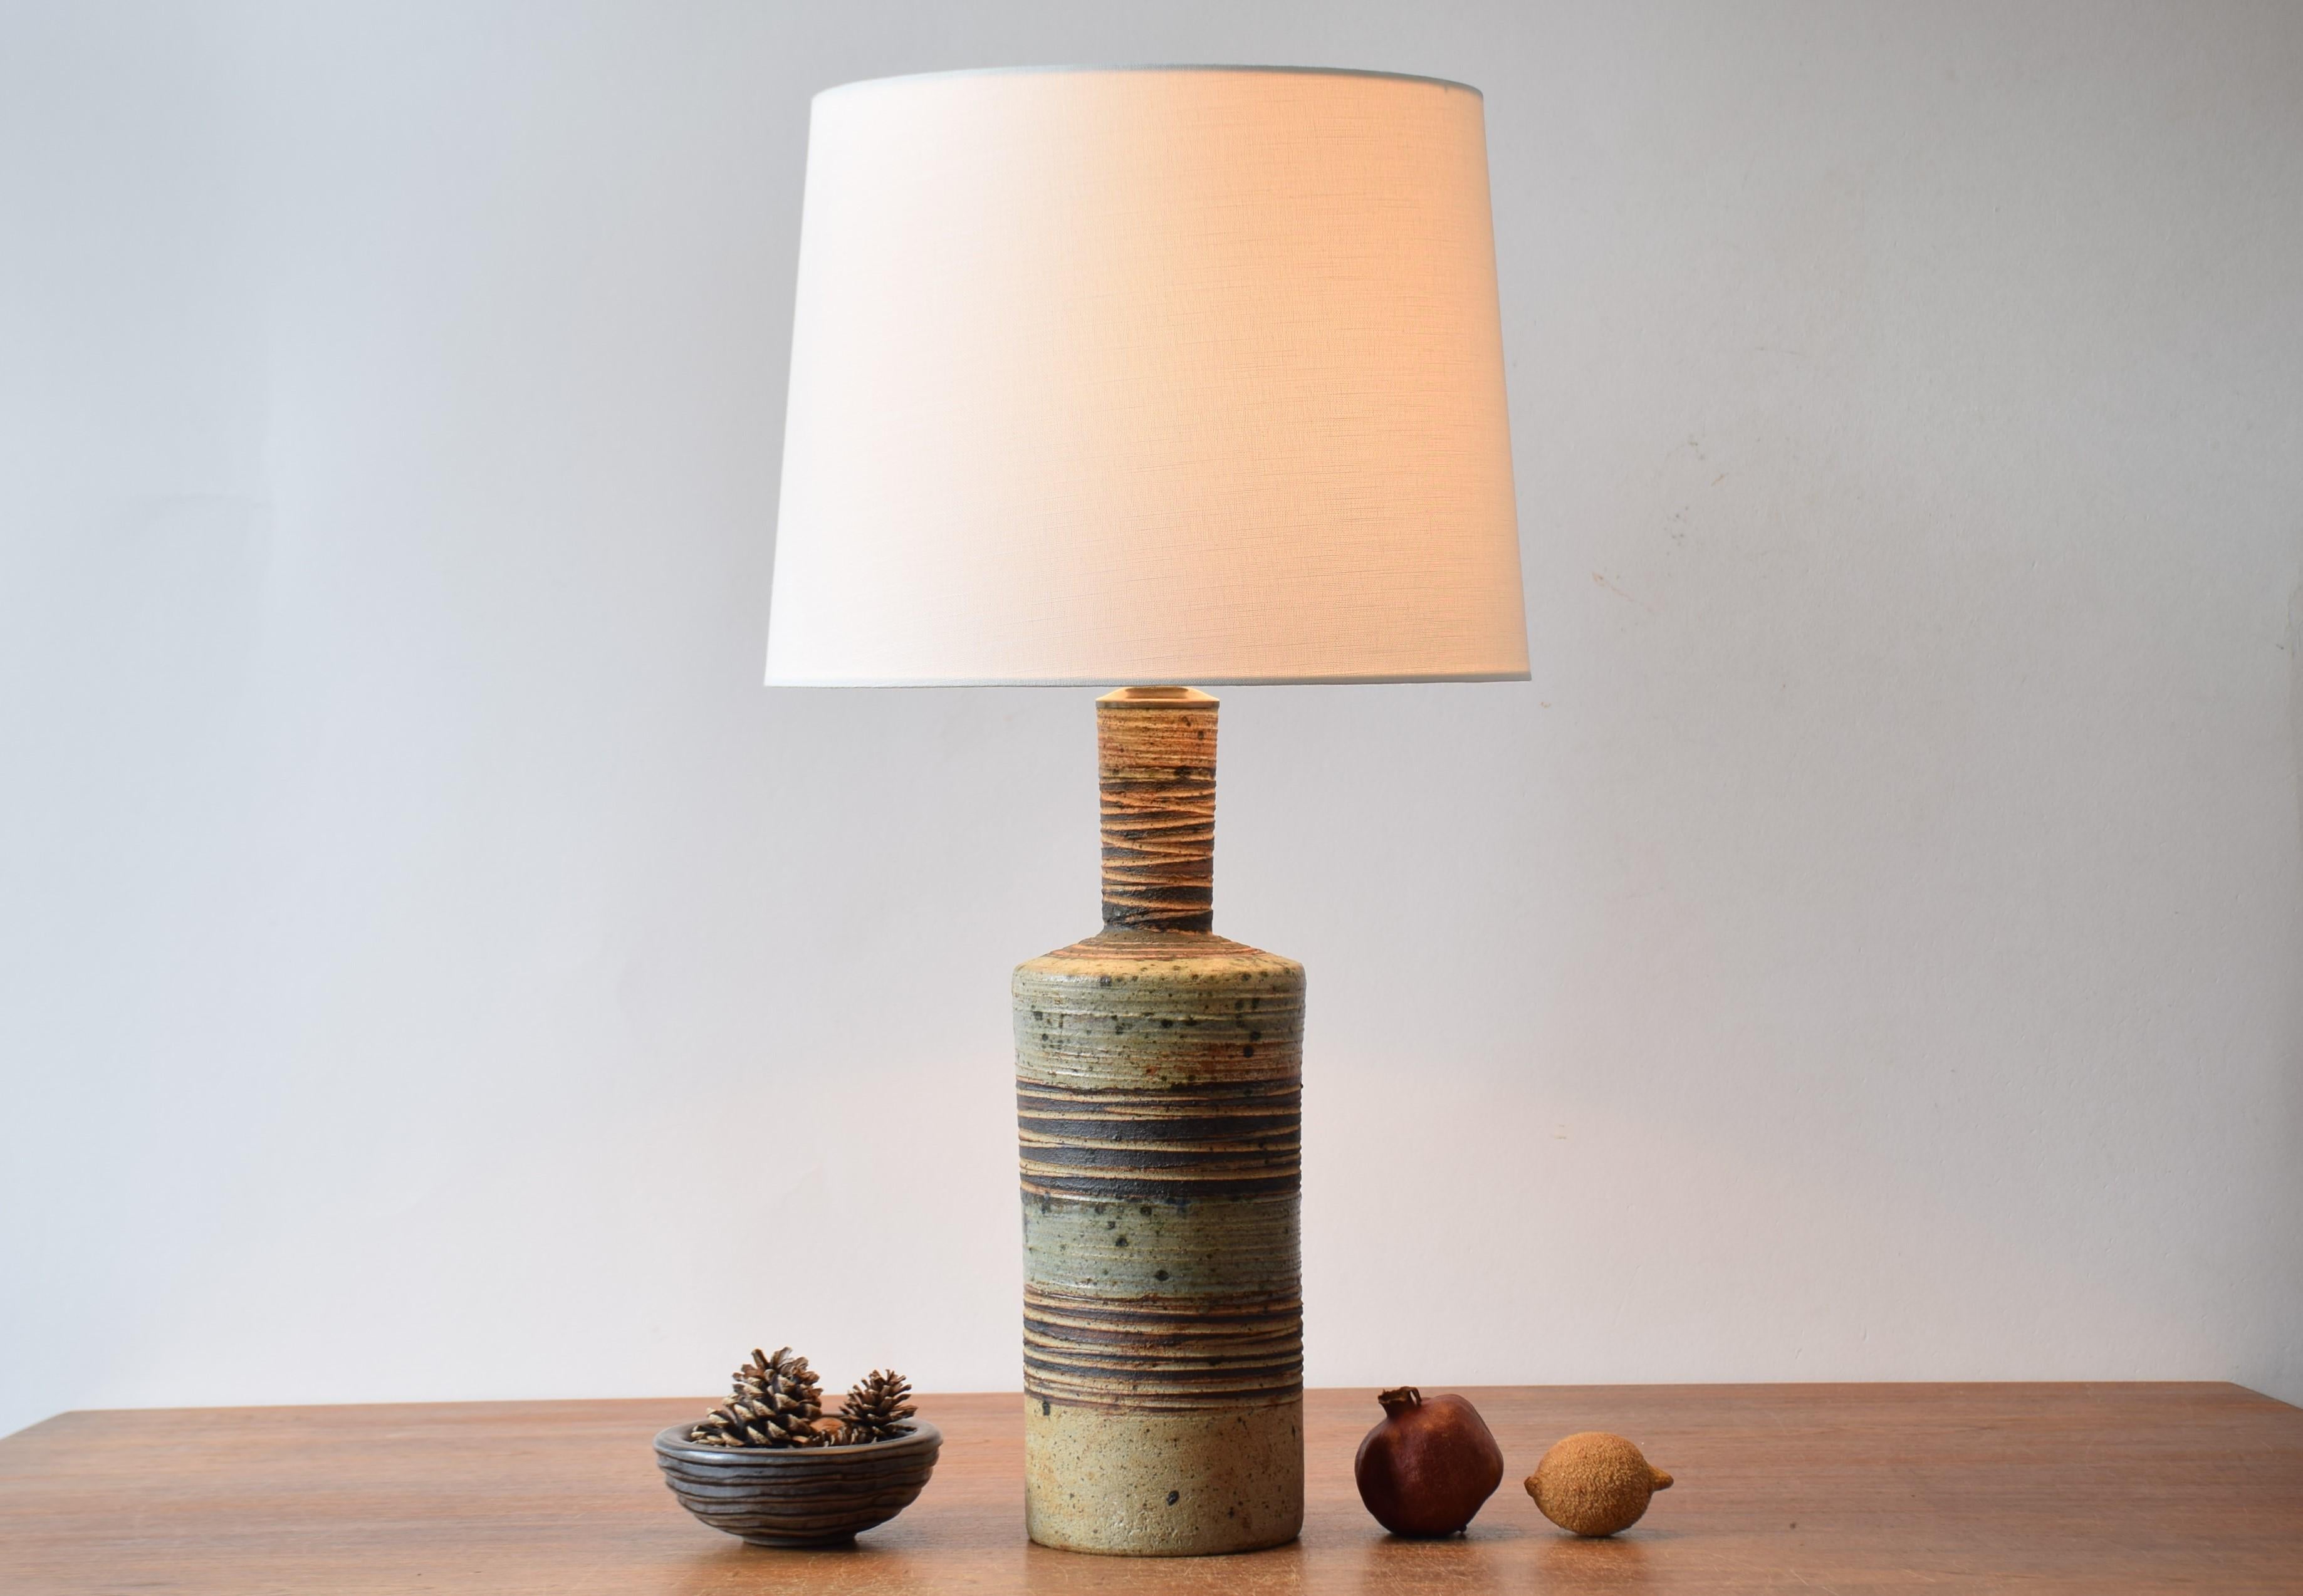 Tall table lamp including lamp shade by Danish ceramist Tue Poulsen (born 1939). Made ca. 1970s in Tue Poulsen´s own studio.
The base is made of chamotte clay and has incised stripes. It partly shows the warm beige clay and partly it´s decorated